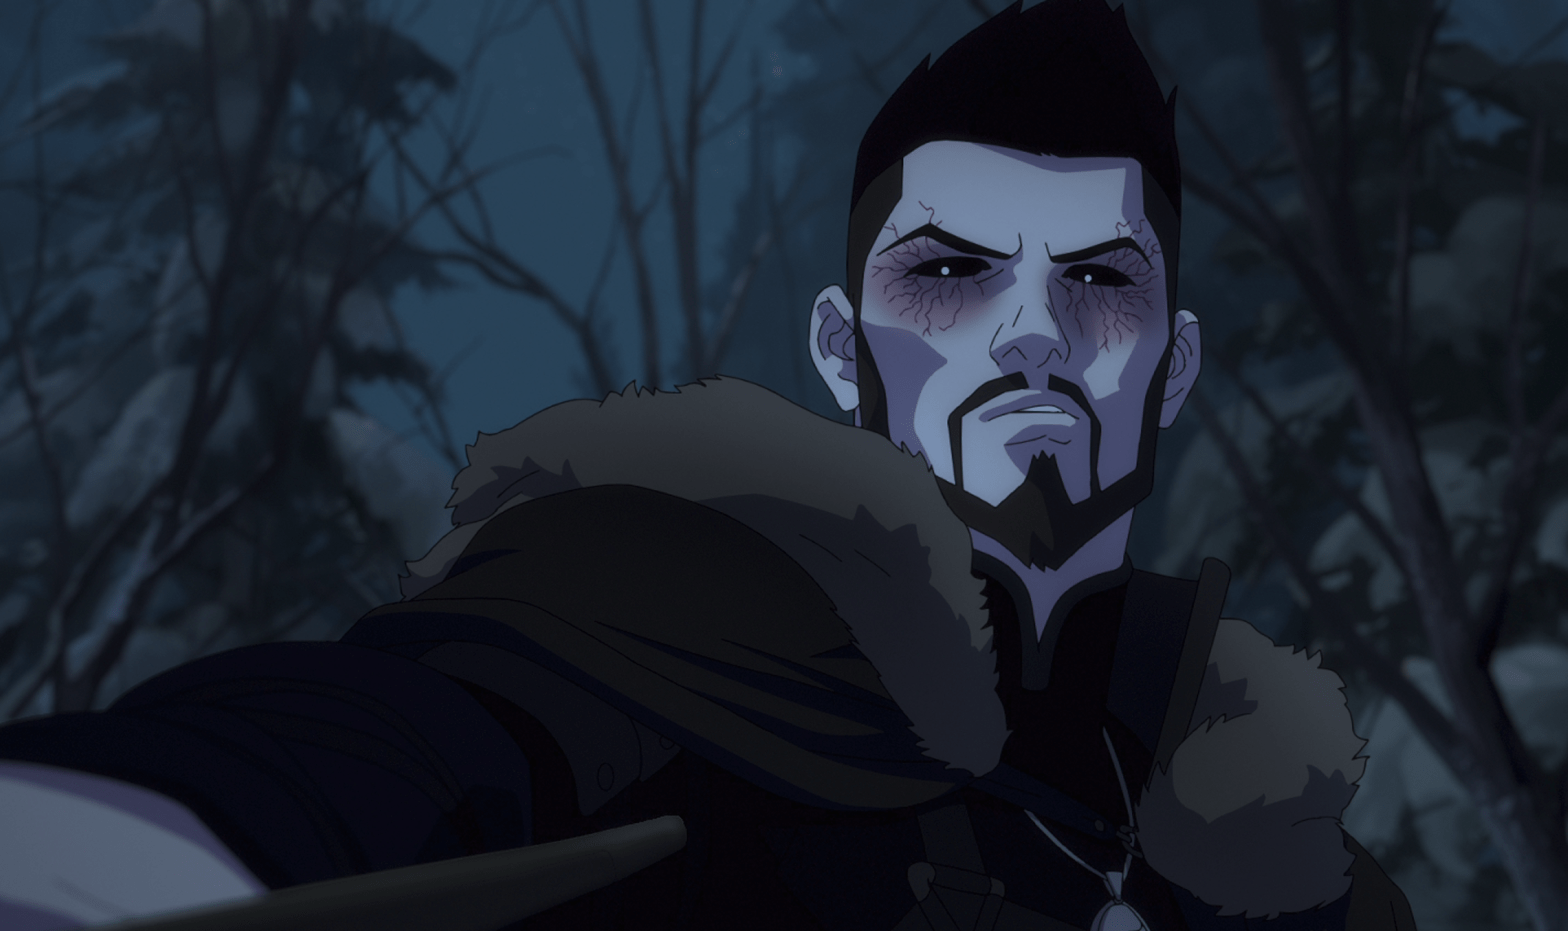 Get to know Vesemir as a young Witcher before he returns older and wiser in The Witcher season 2. (Image: Netflix)